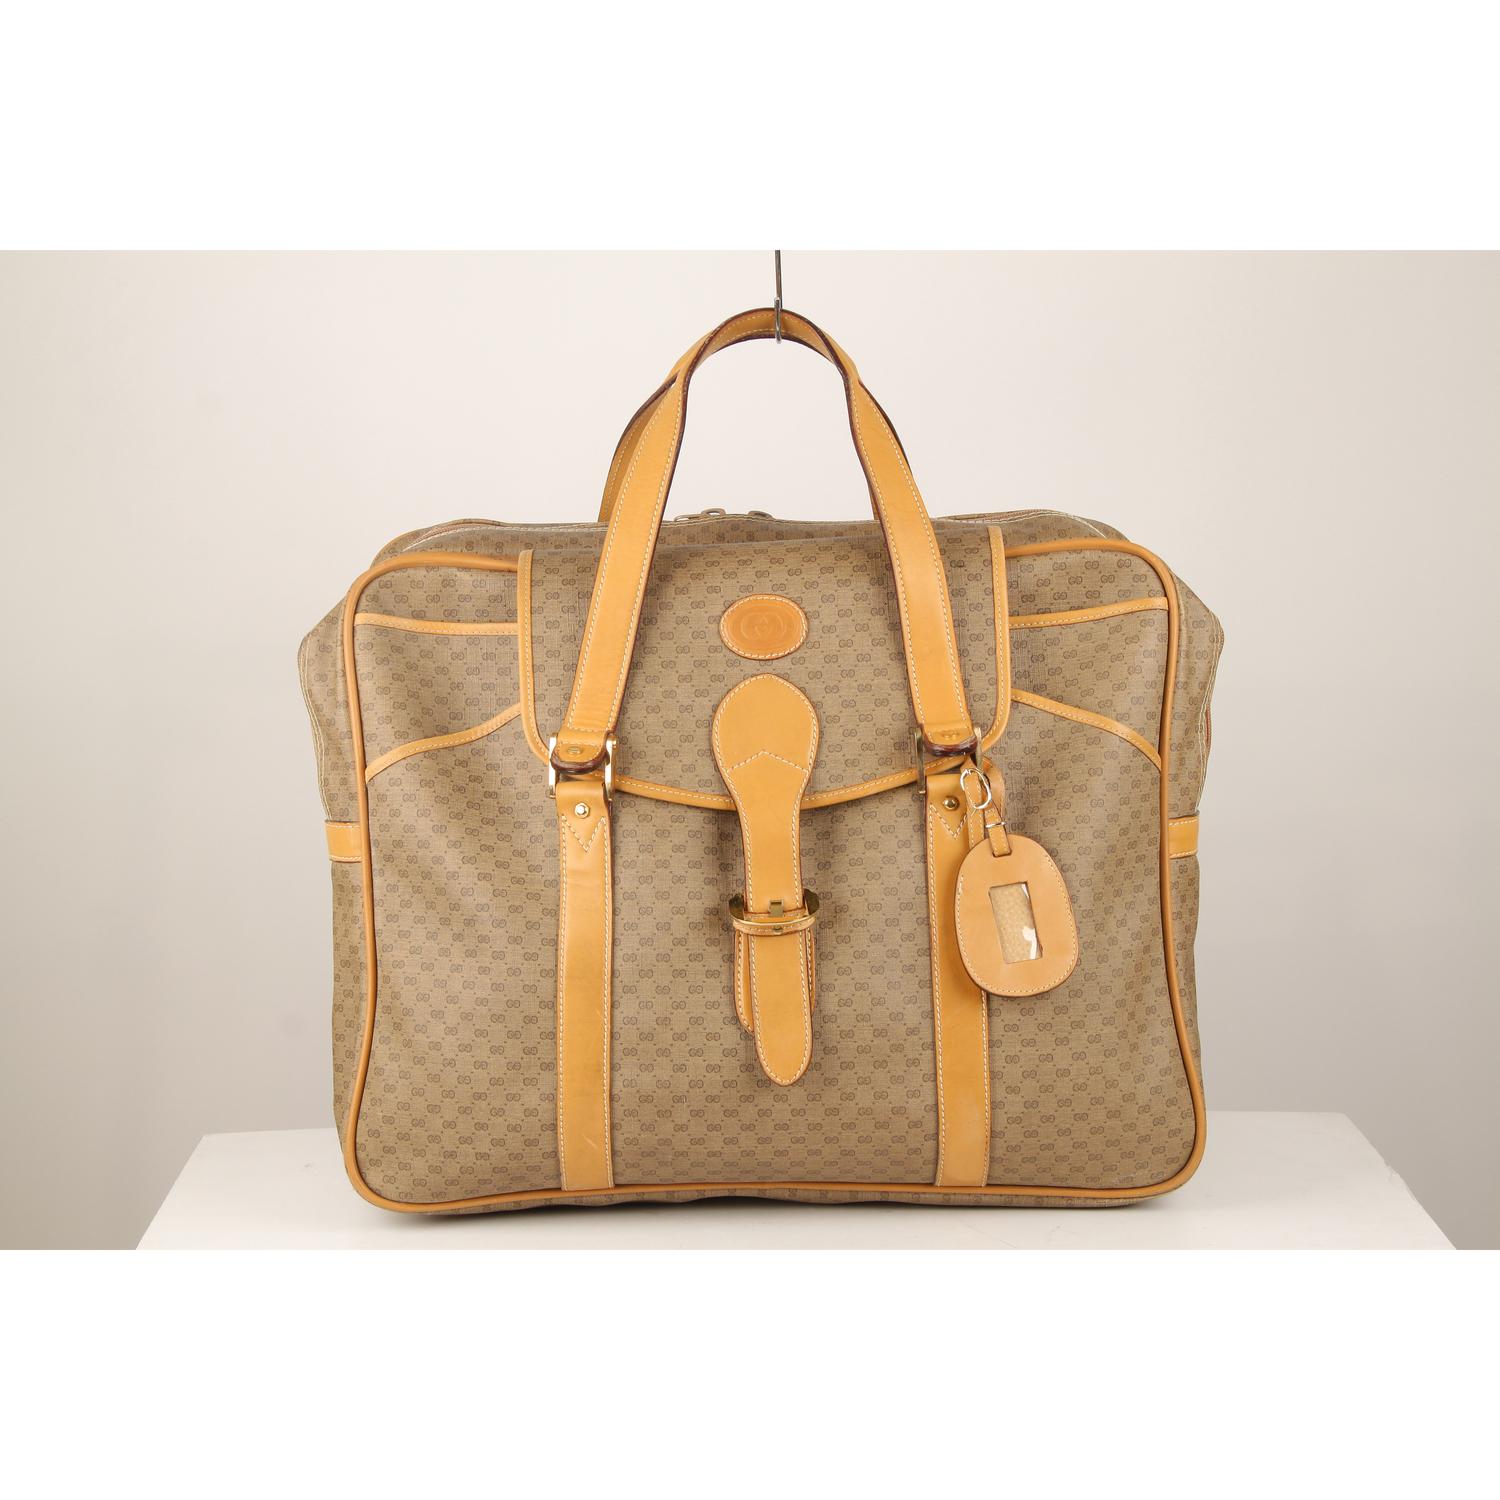 Tan GG monogram canvas travel bag by GUCCI with tan leather trim. 2 main compartments with upper zipper closure. Front open sections closed by a front flap with buckle closure. Diamond fabric lining. 1 side zip pocket inside 'GUCCI - Made in Italy'